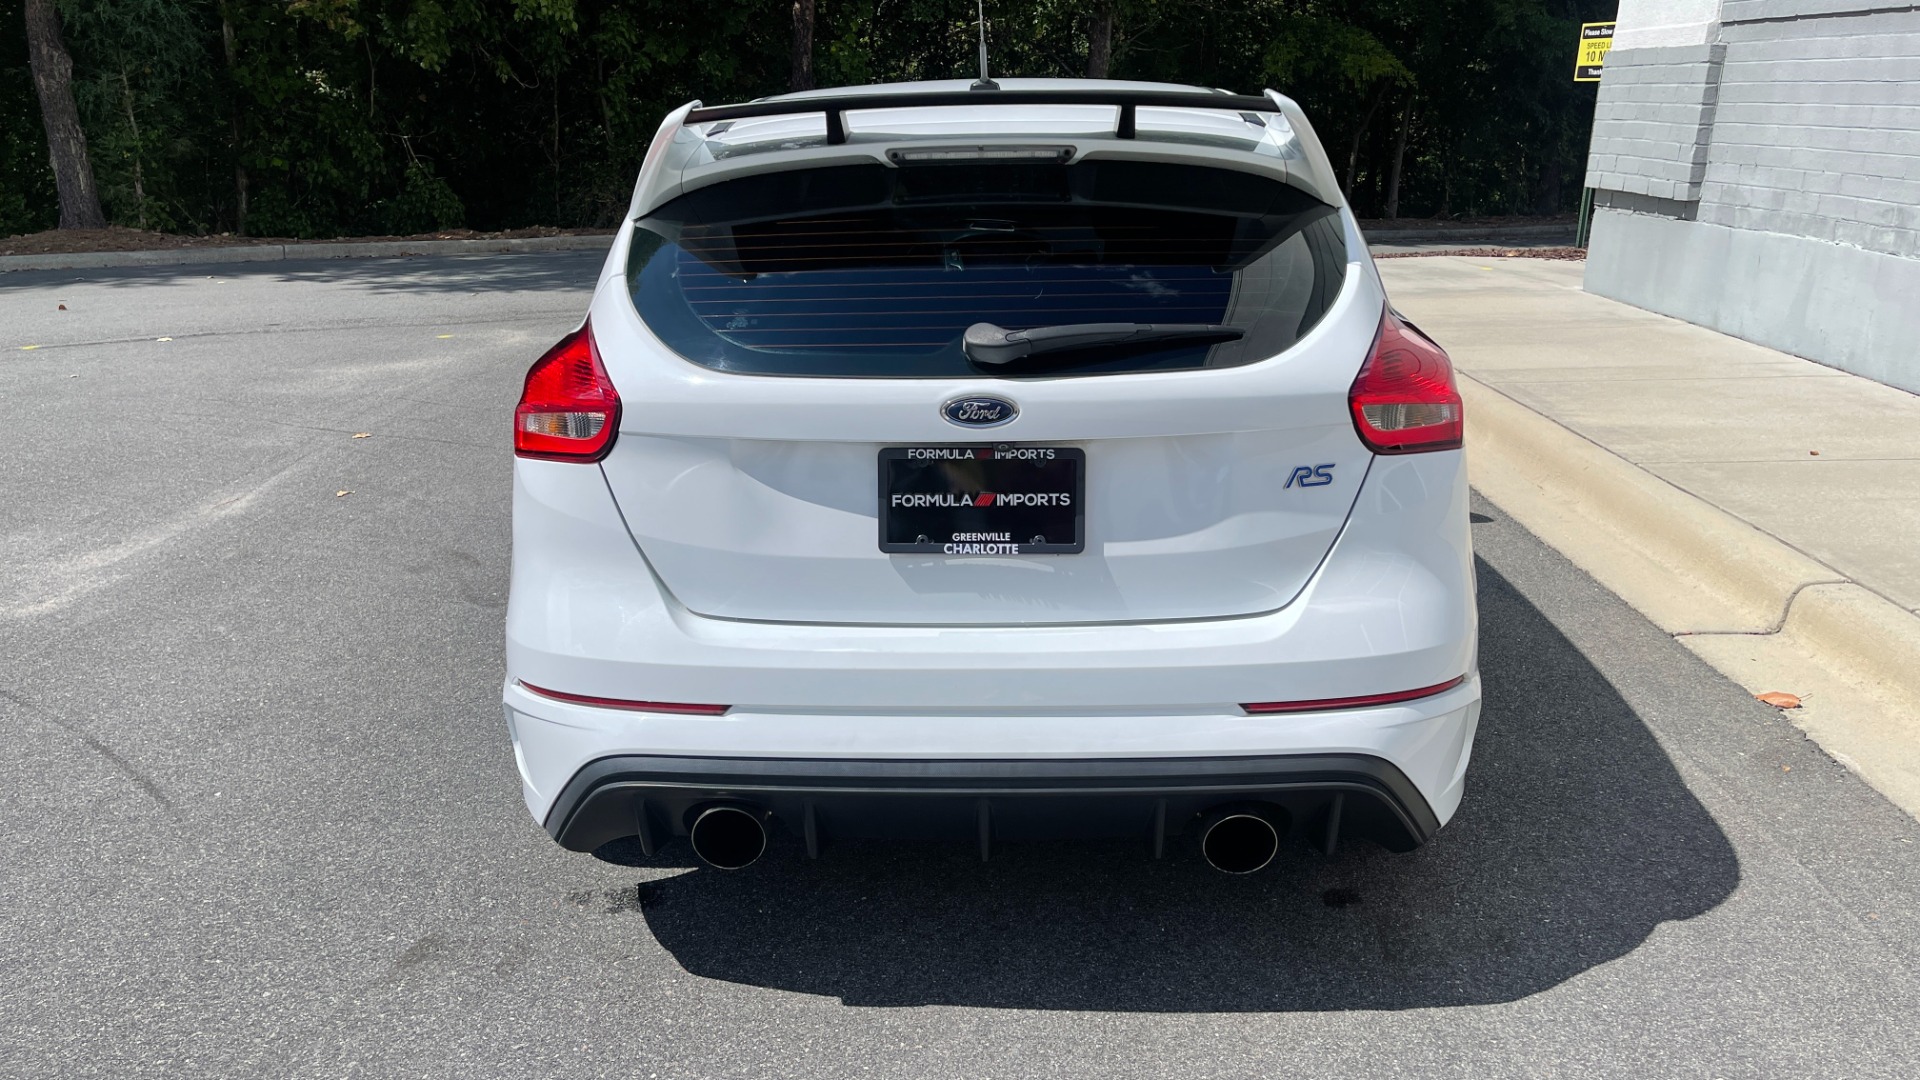 Used 2017 Ford Focus RS / SUNROOF / RS2 PACKAGE / RECAROS / MBRP EXHAUST / ALL WHEEL DRIVE for sale Sold at Formula Imports in Charlotte NC 28227 31